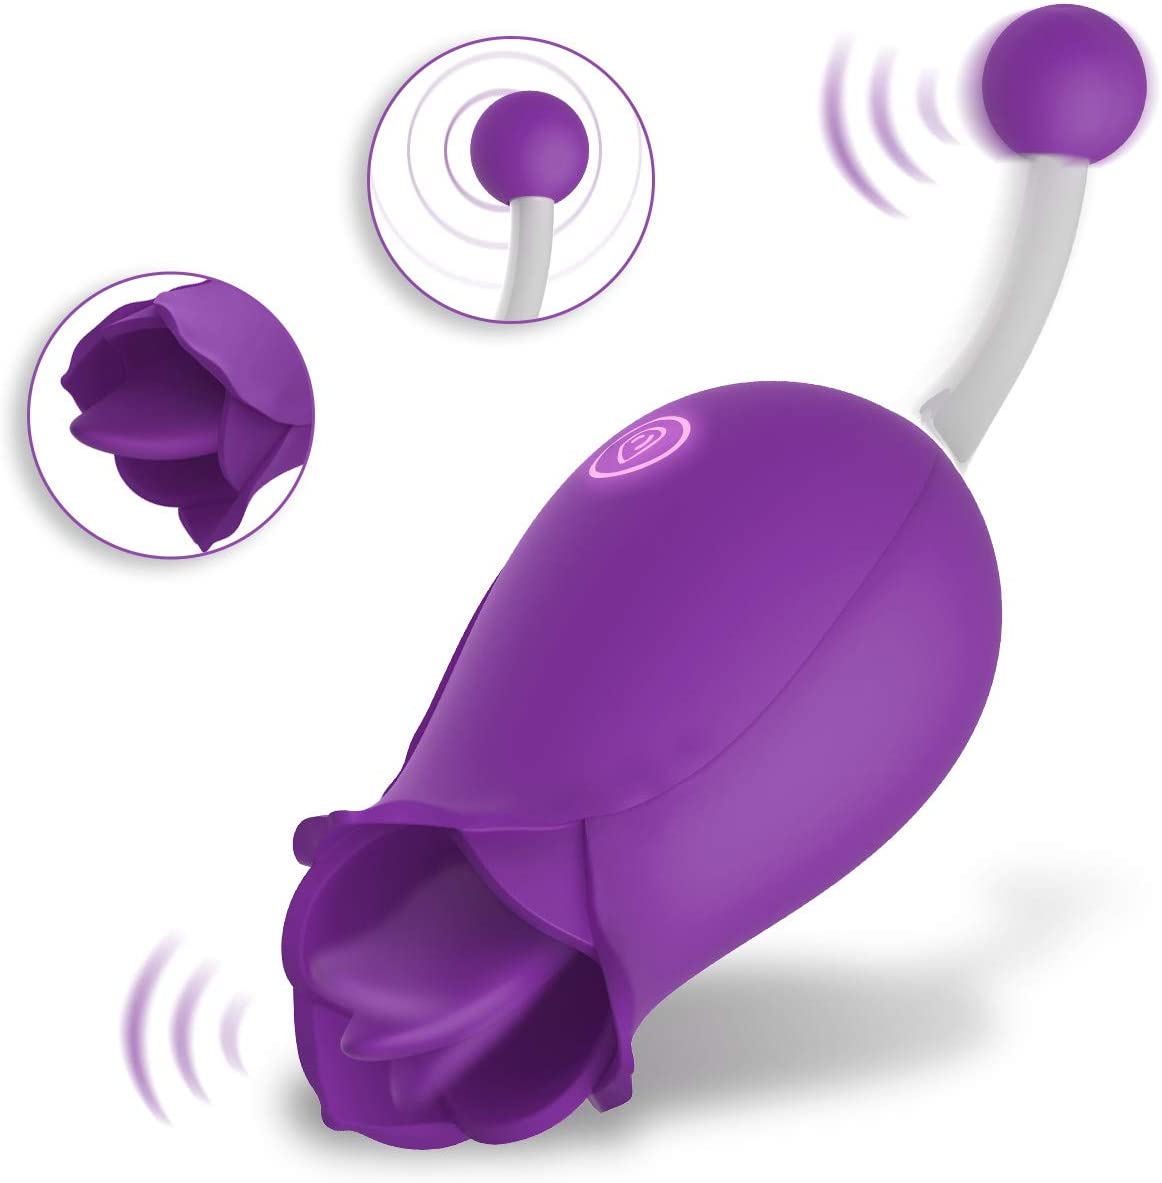 PHANXY 2 in 1 Licking & High-Frequency G-Spot Rose Vibrator